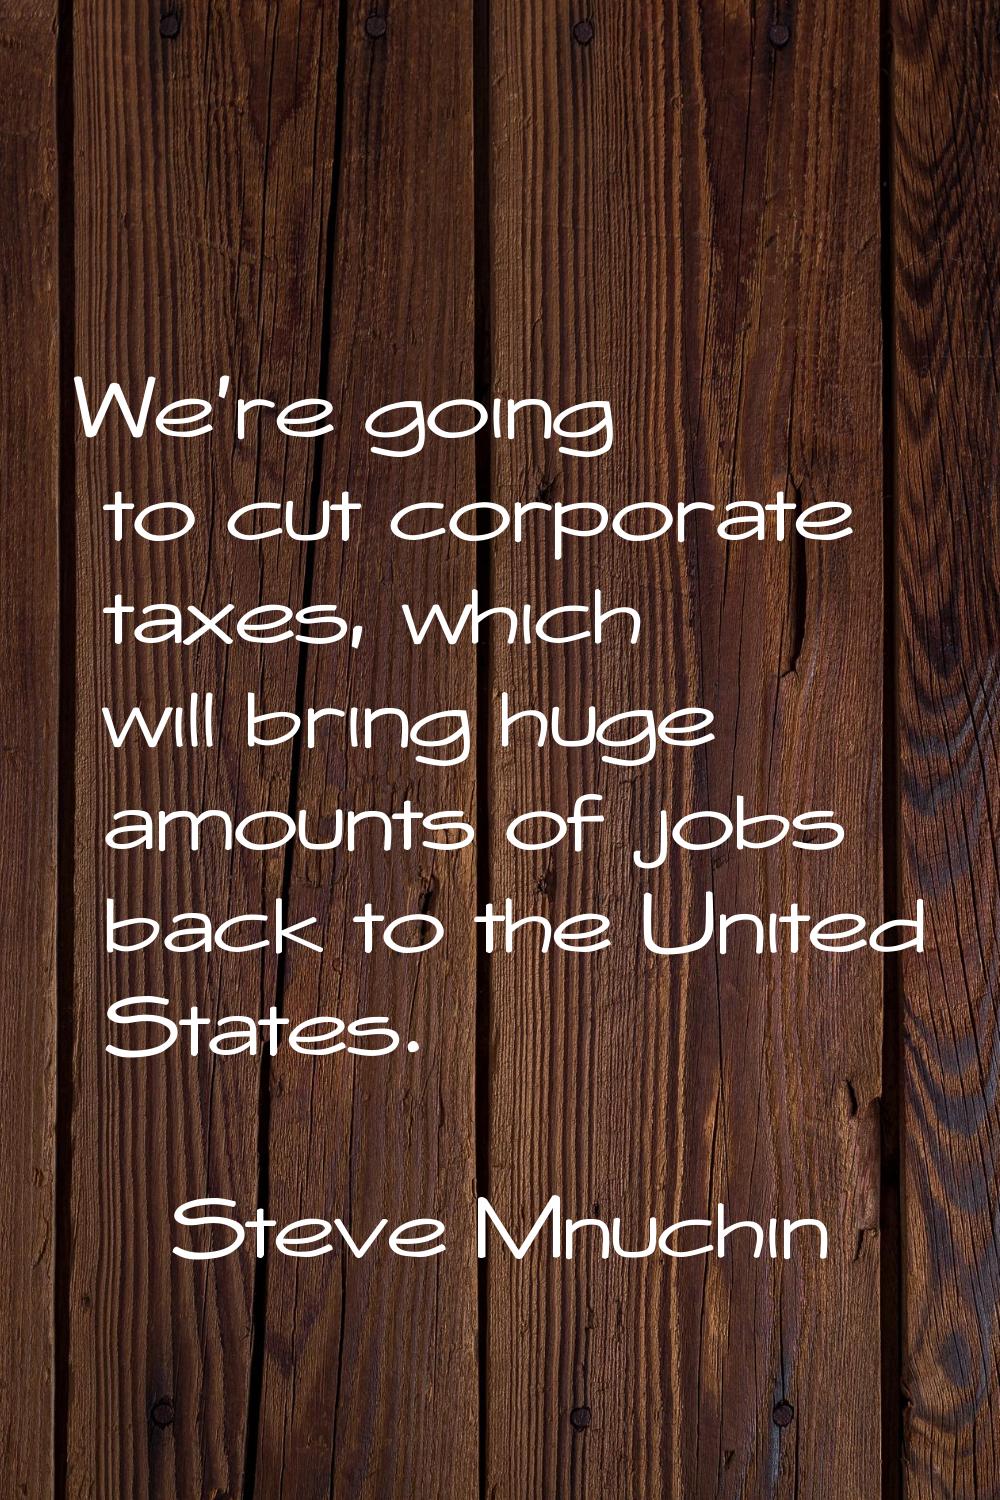 We're going to cut corporate taxes, which will bring huge amounts of jobs back to the United States